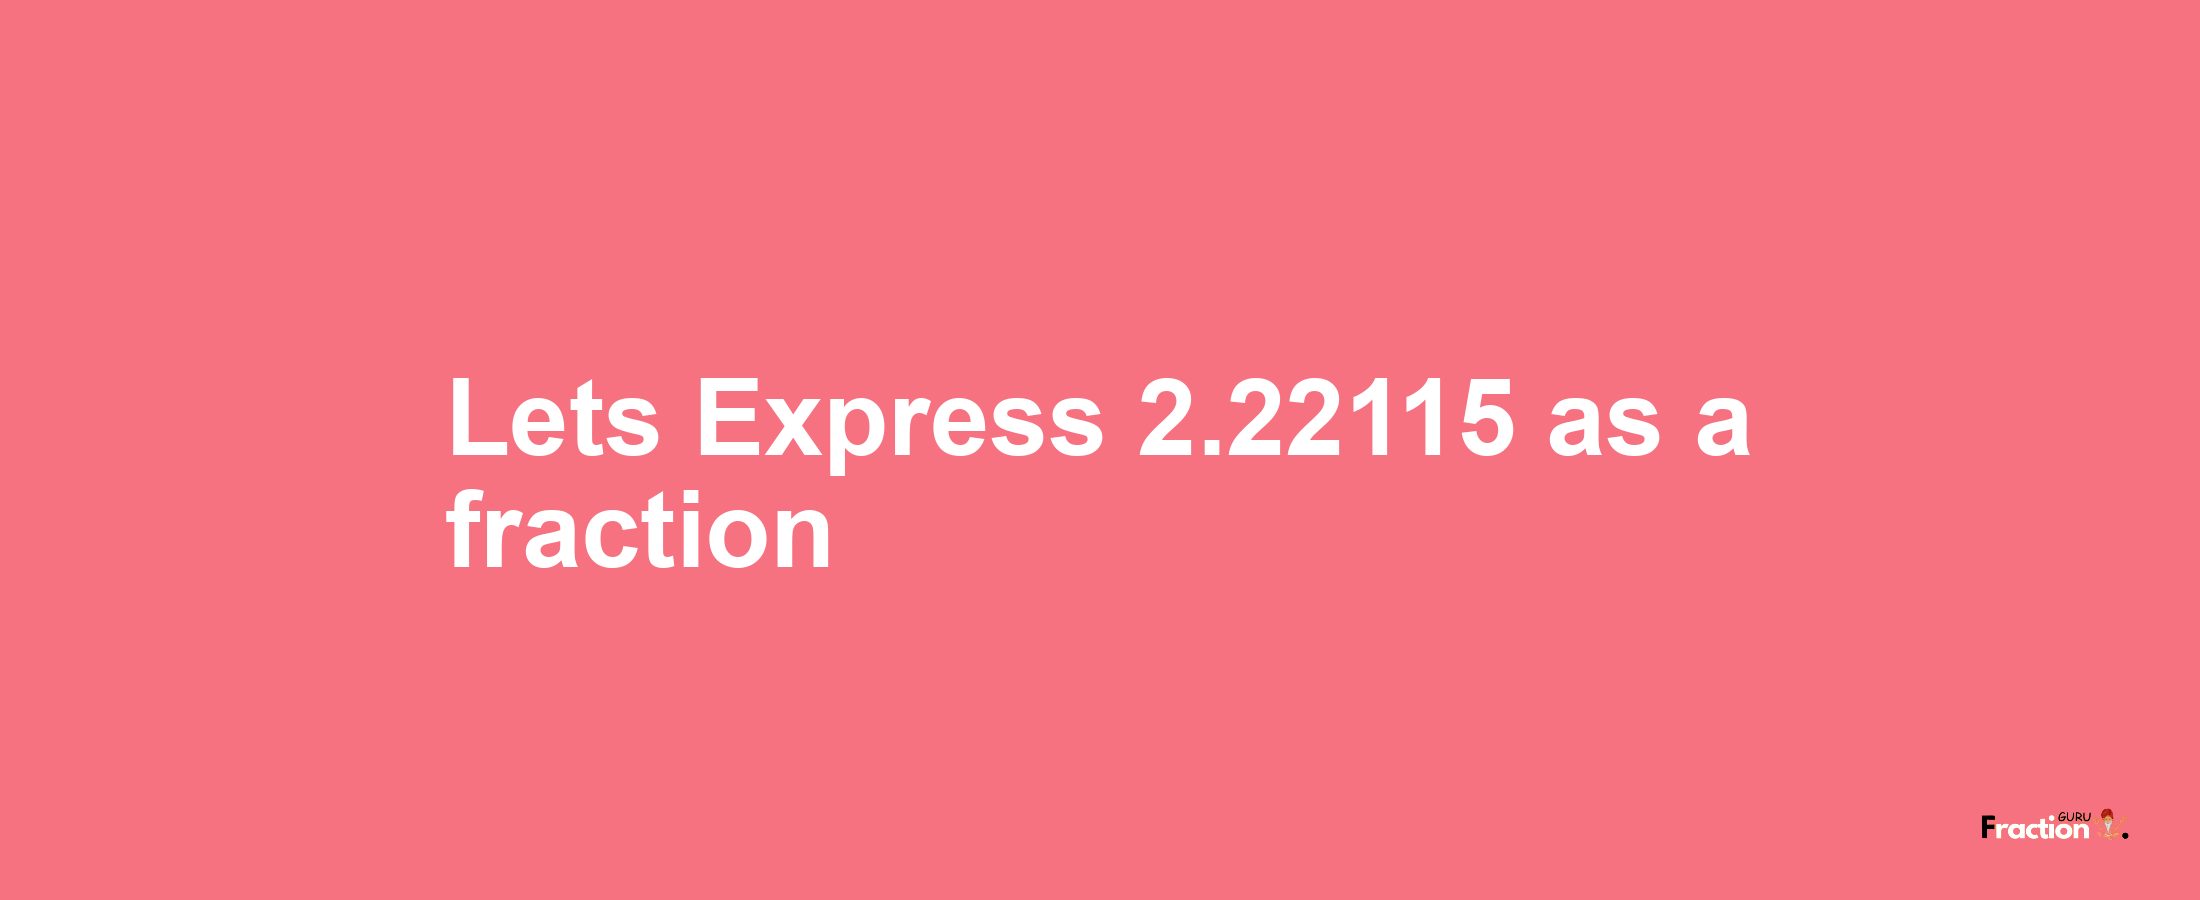 Lets Express 2.22115 as afraction